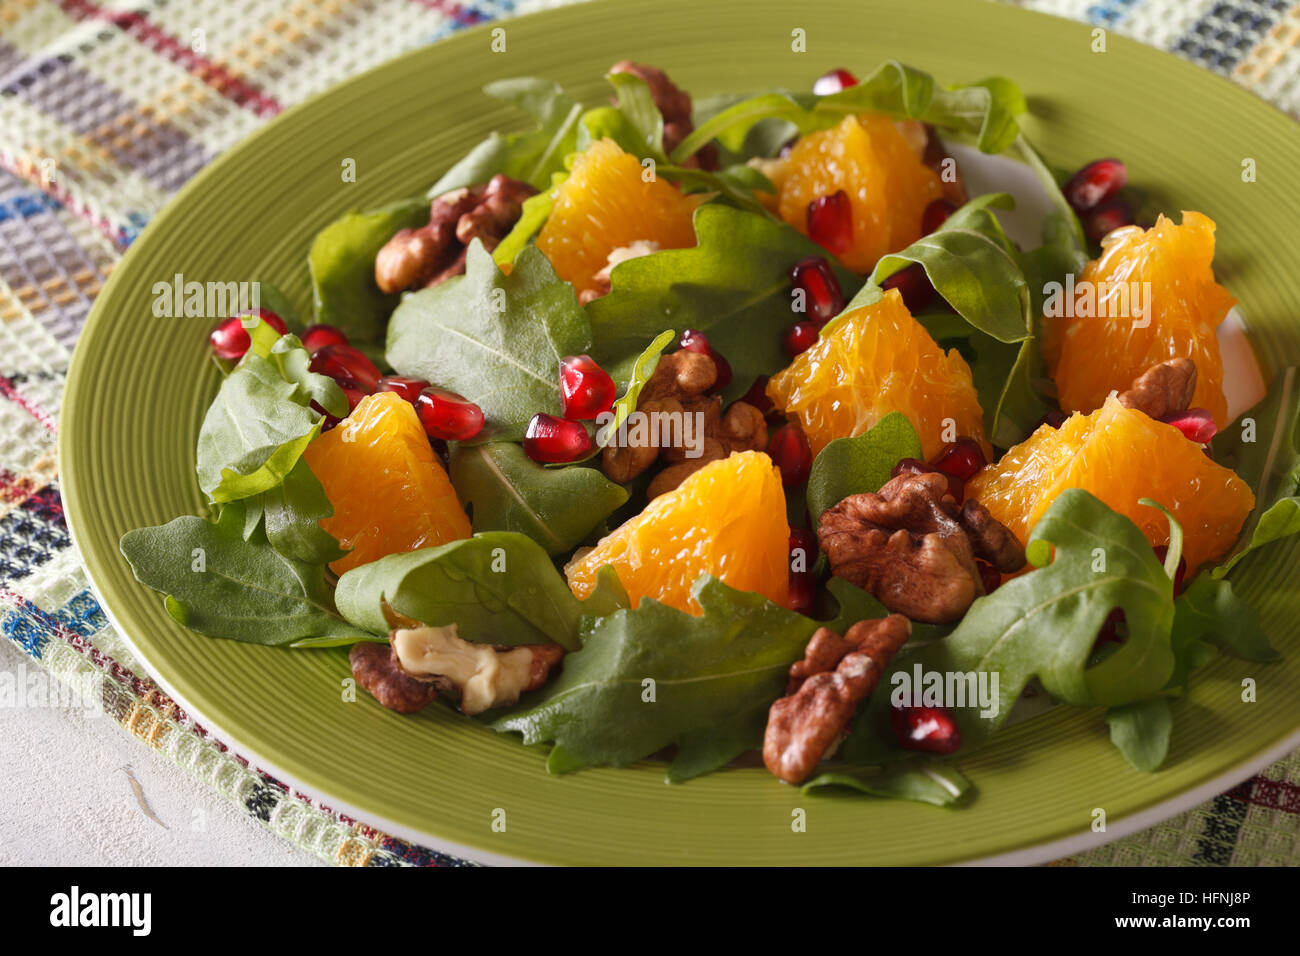 Healthy salad with pomegranate, oranges, walnuts and arugula close-up on a plate. horizontal Stock Photo